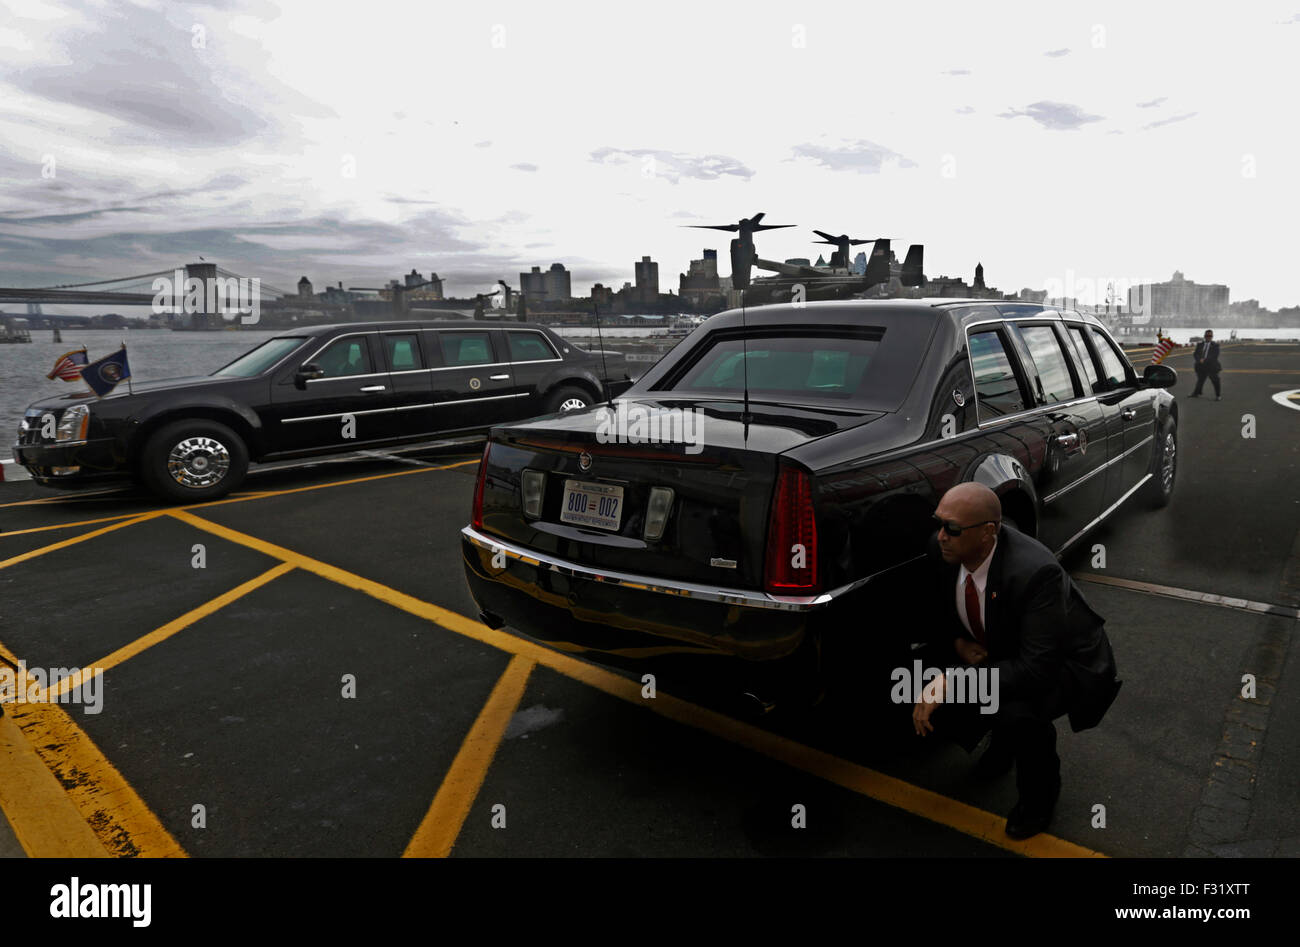 New York, New York, USA. 27th Sep, 2015. A US Secret Service agent (R) kneels down to avoid the rotor wash from the first of four White House helicopters that escort US President Barack Obama from Kennedy airport to lower Manhattan in New York, New York, USA, 27 September 2015. The President will speak at the Sustainable Development Summit today and address the the 70th session of the United Nations General Assembly, General Debate on Monday 28 September 2015. Credit: Peter Foley/Pool via CNP /dpa - NO WIRE SERVICE - Credit:  dpa/Alamy Live News Stock Photo